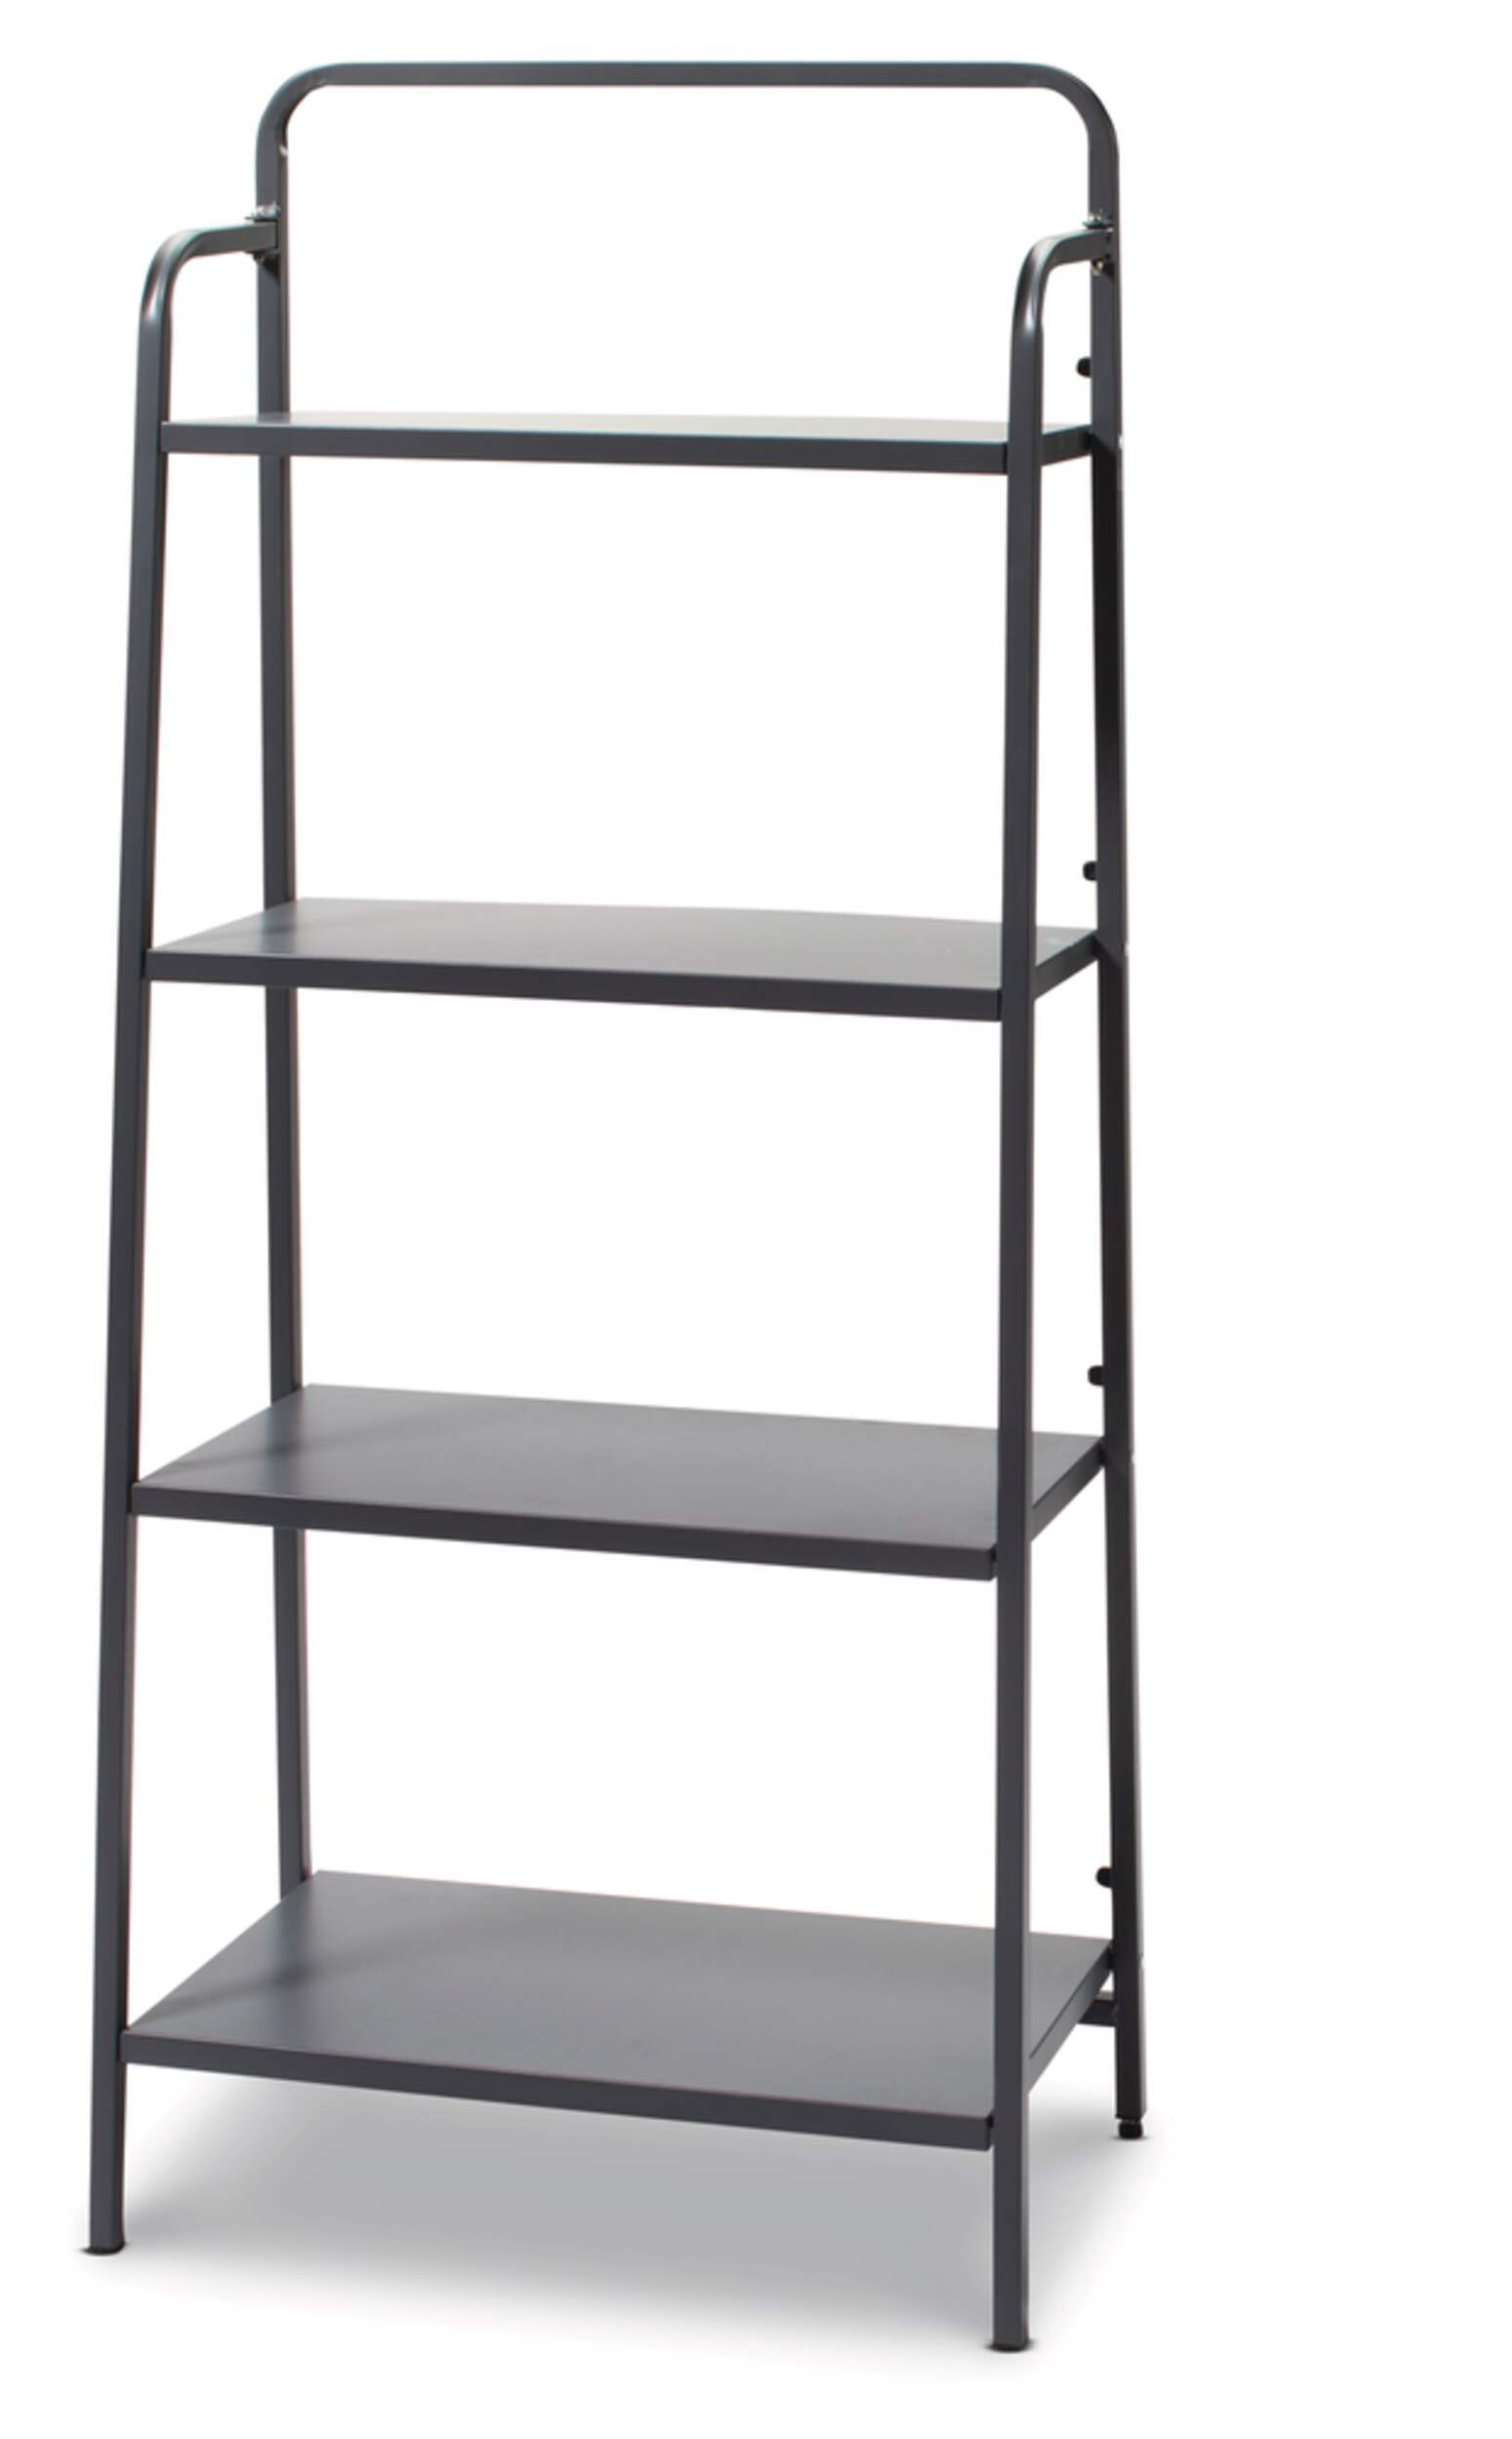 Type A Align 4 Tier Vertical Folding Storage Rack Canadian Tire 